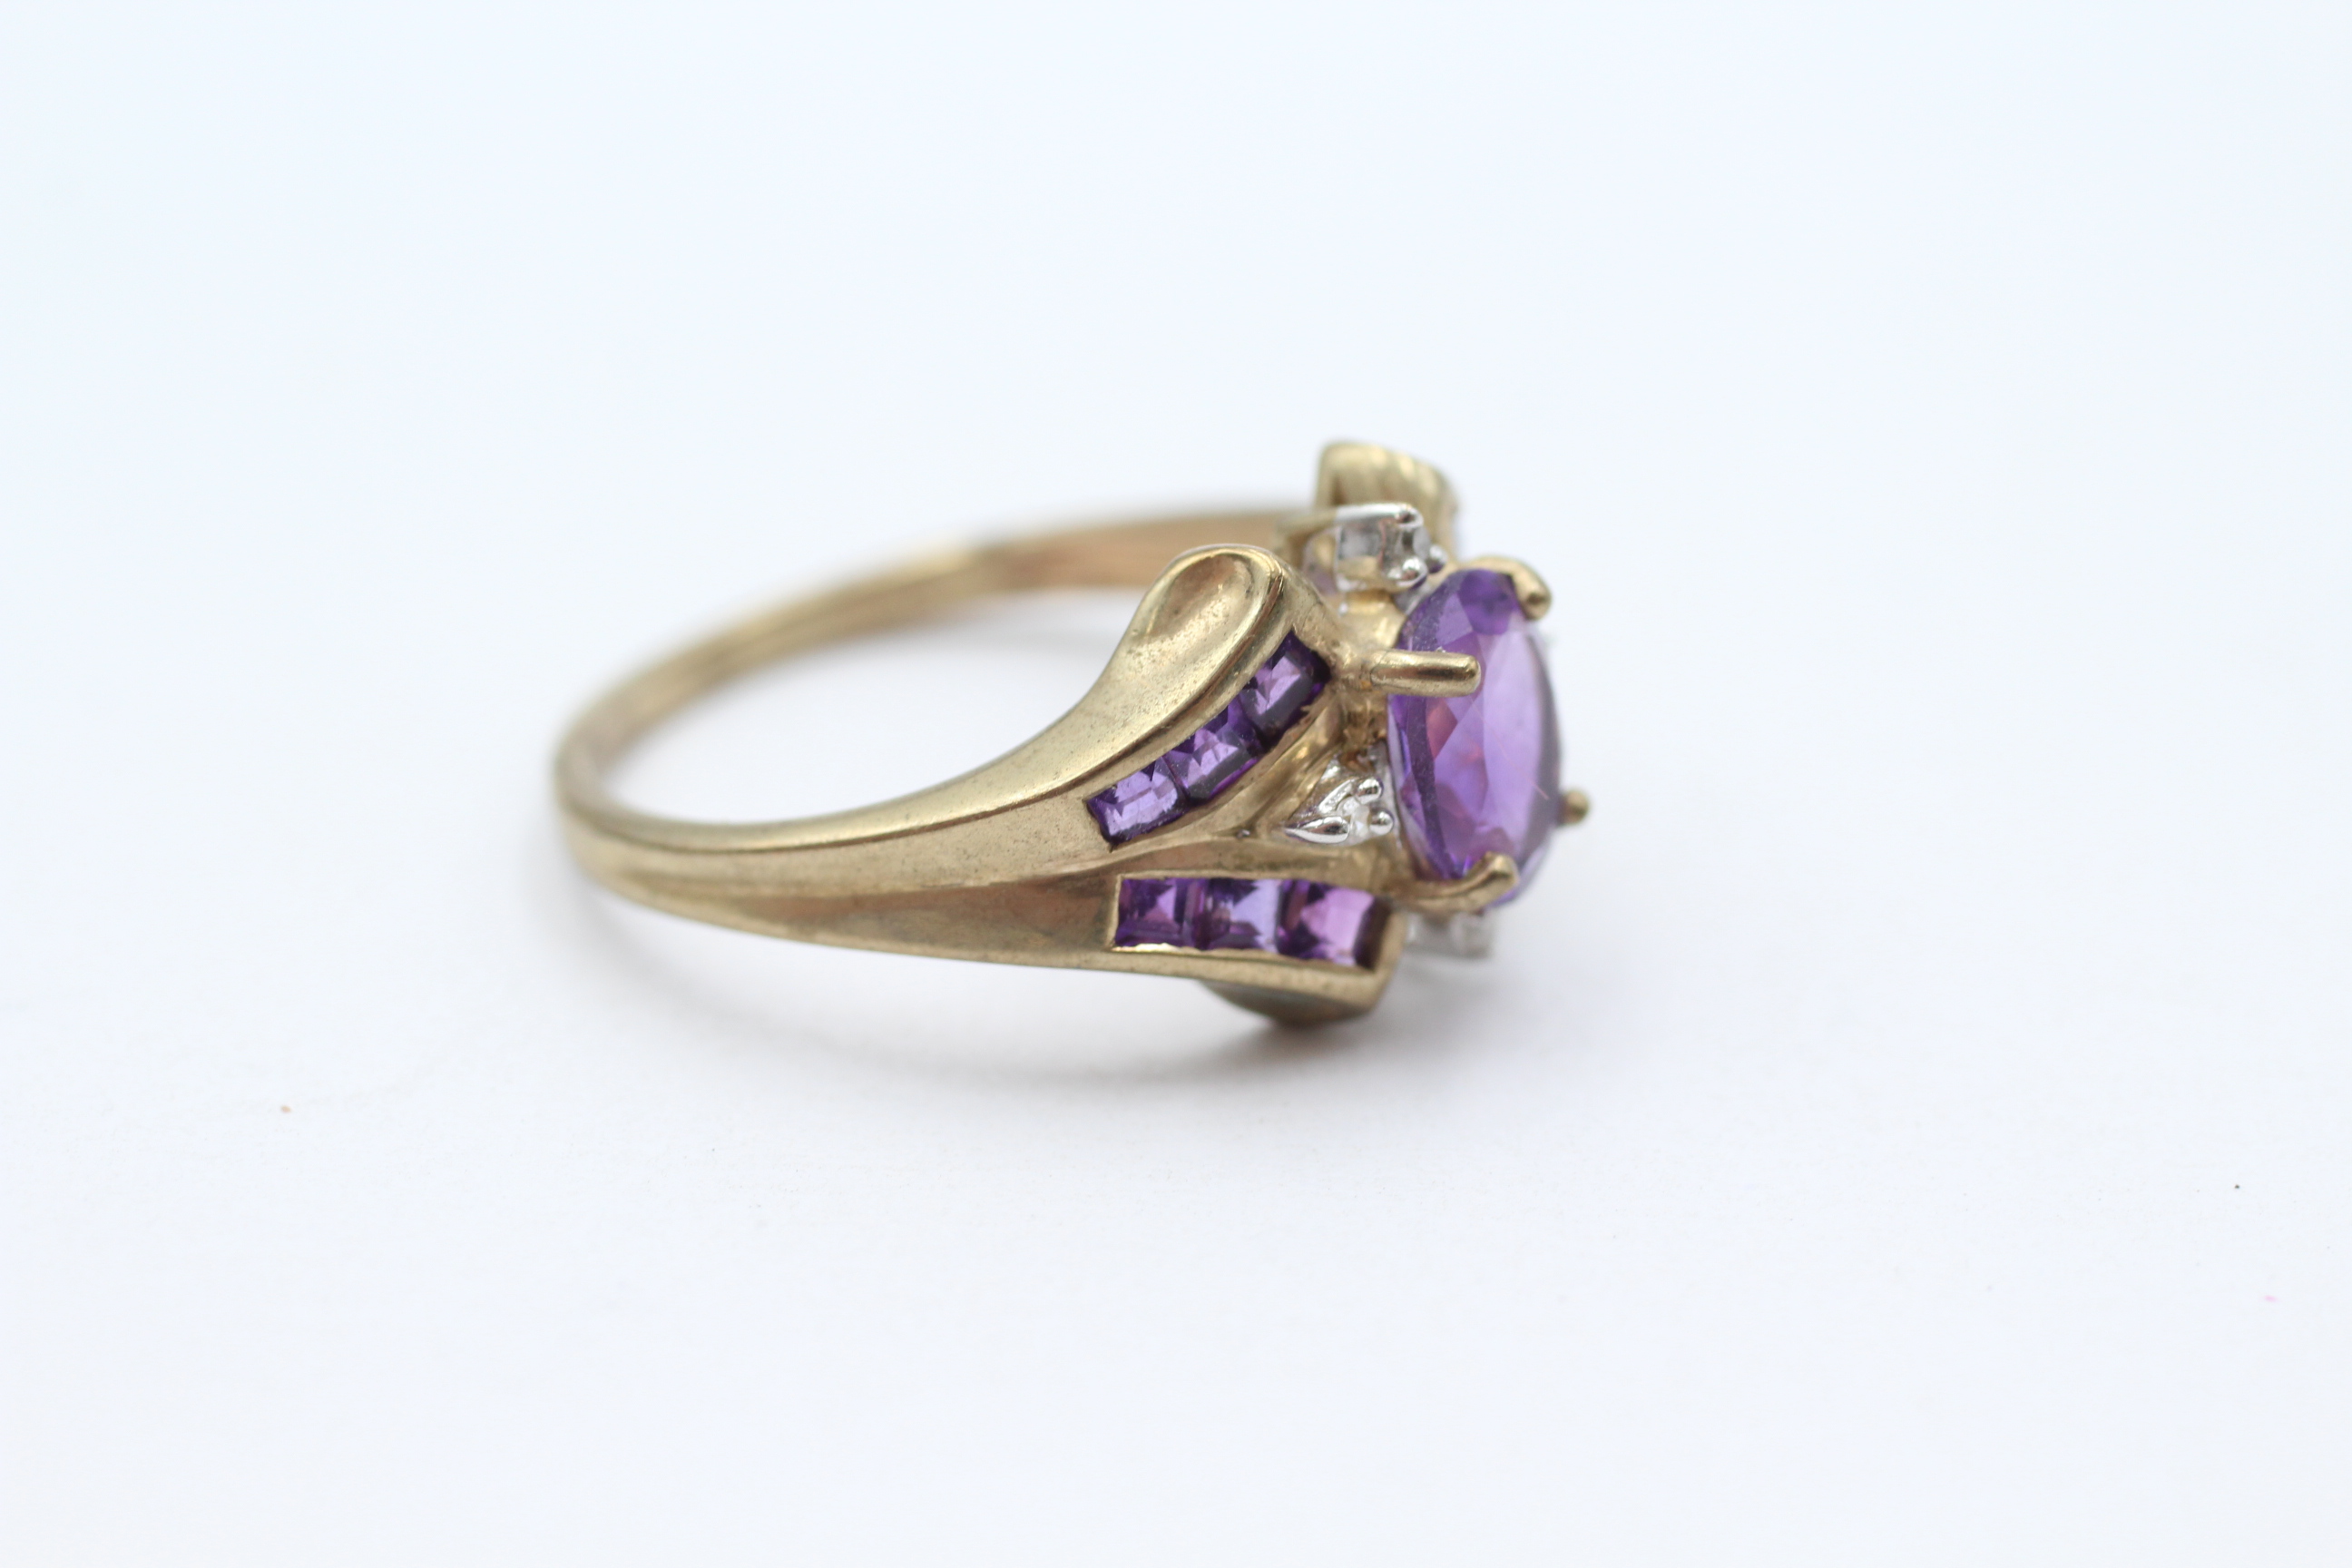 9ct gold diamond & amethyst cluster ring with tapered shank Size P 1/2 - 3.2 g - Image 2 of 4